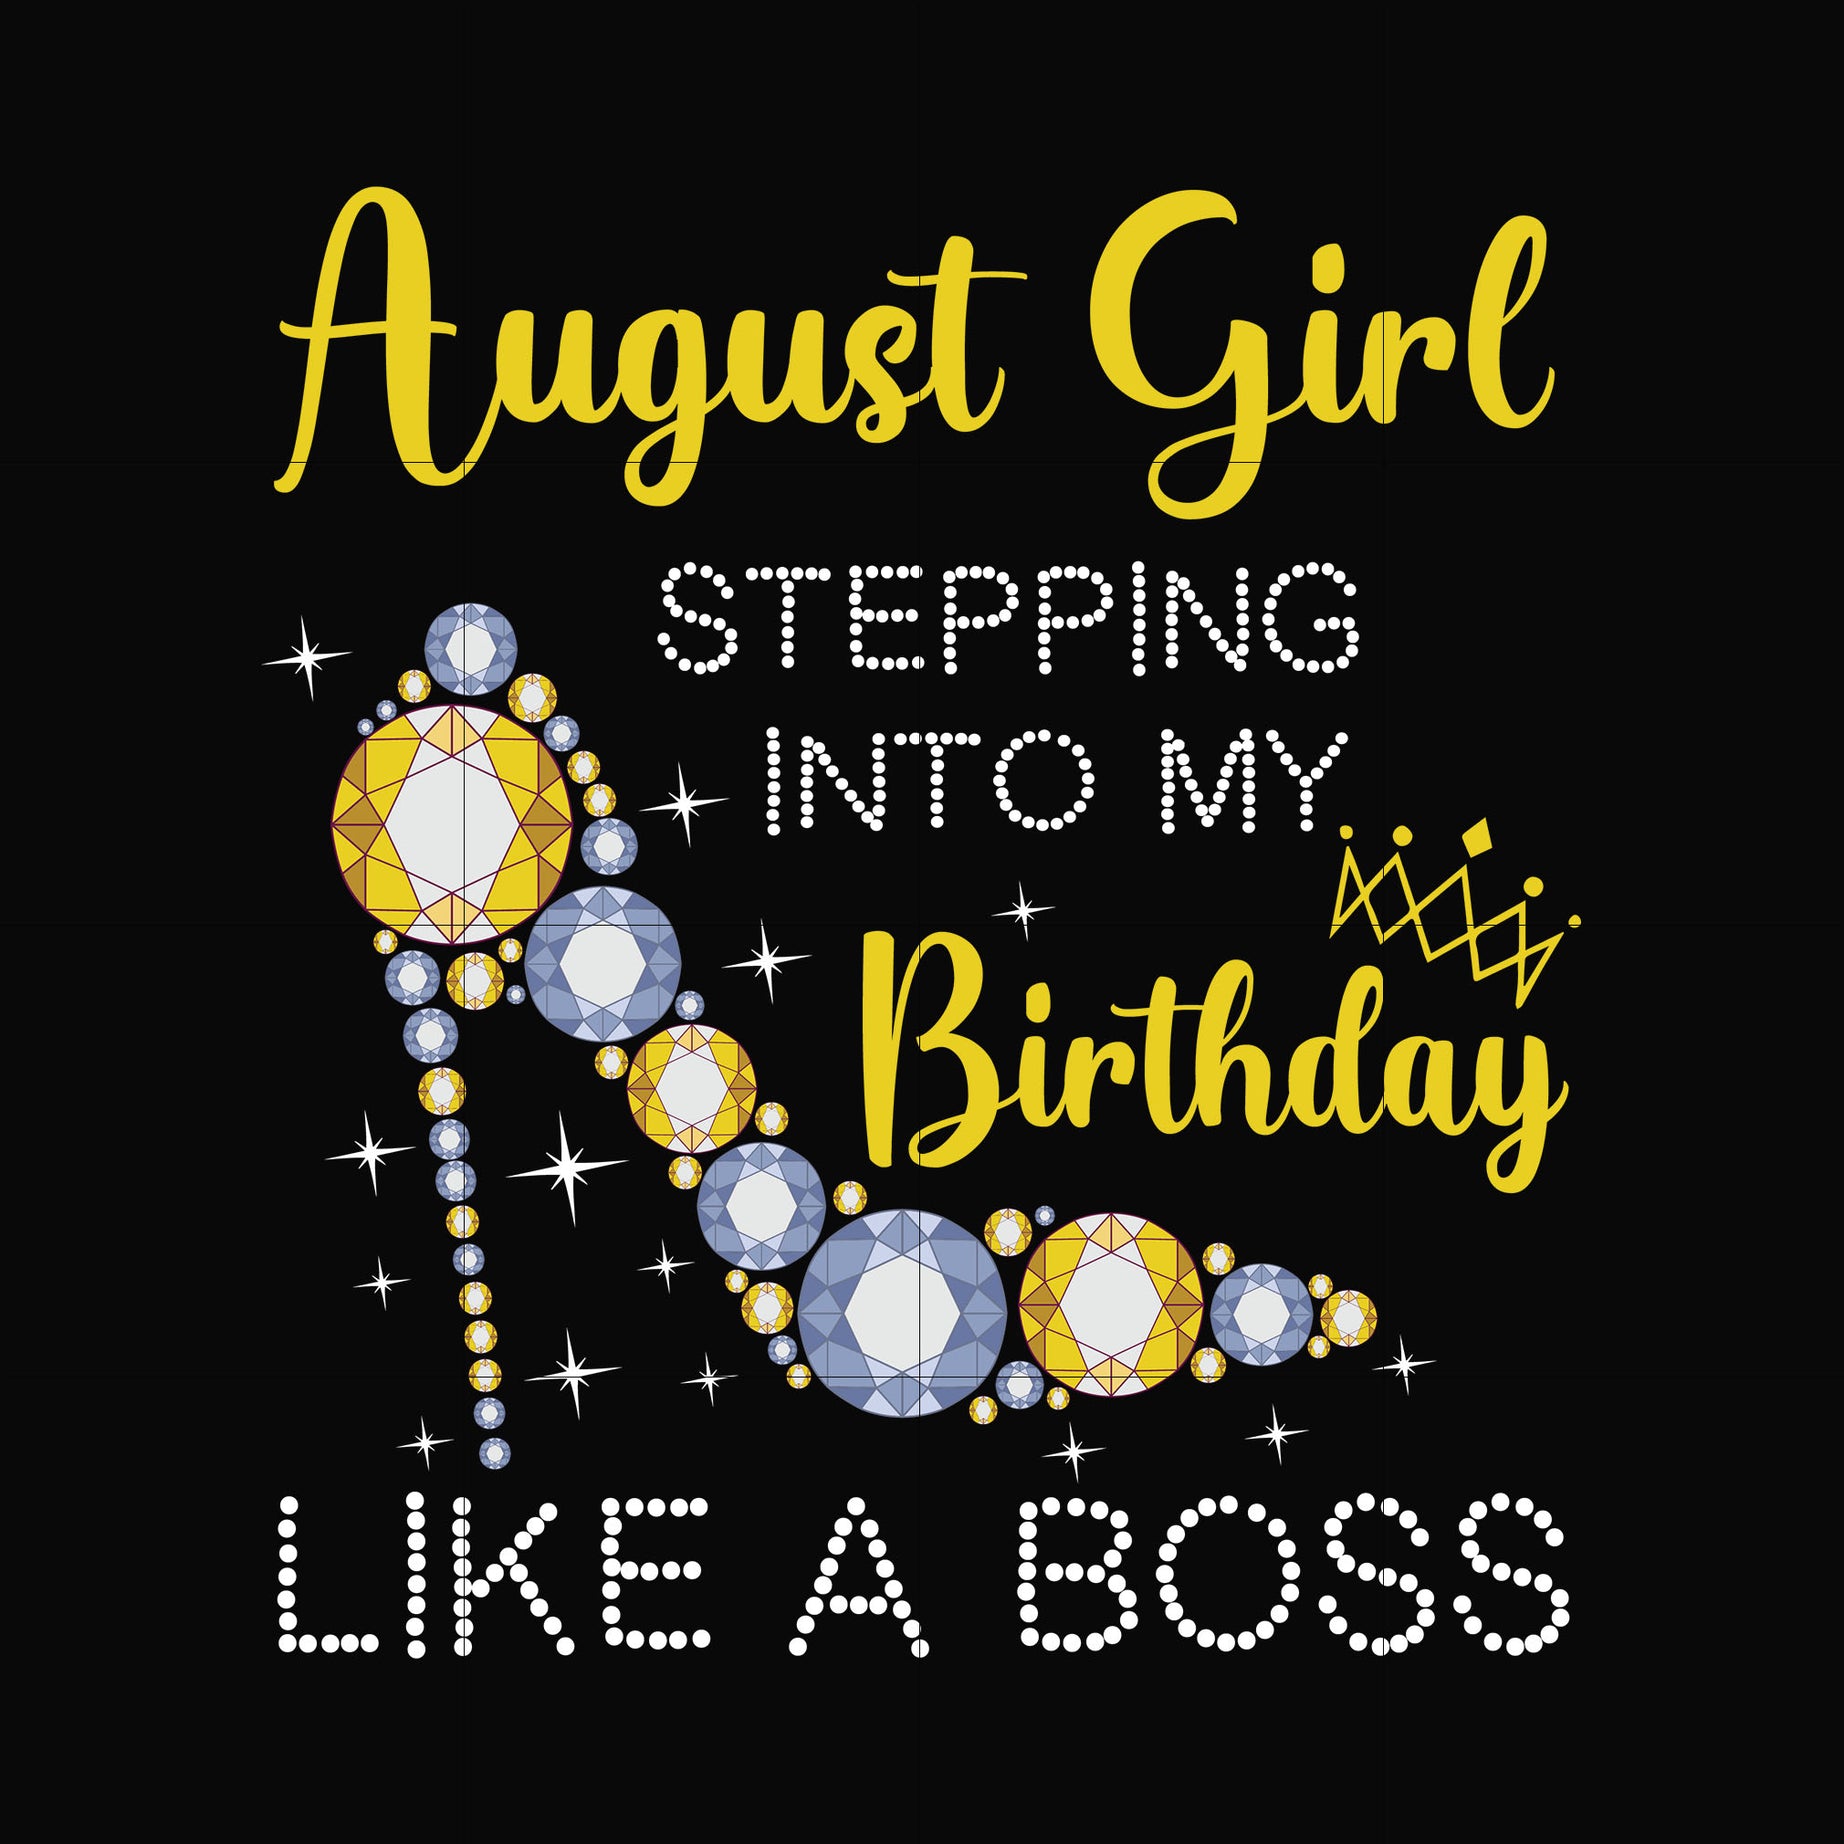 August girl stepping into my birthday like a boss svg, png, dxf, eps digital file